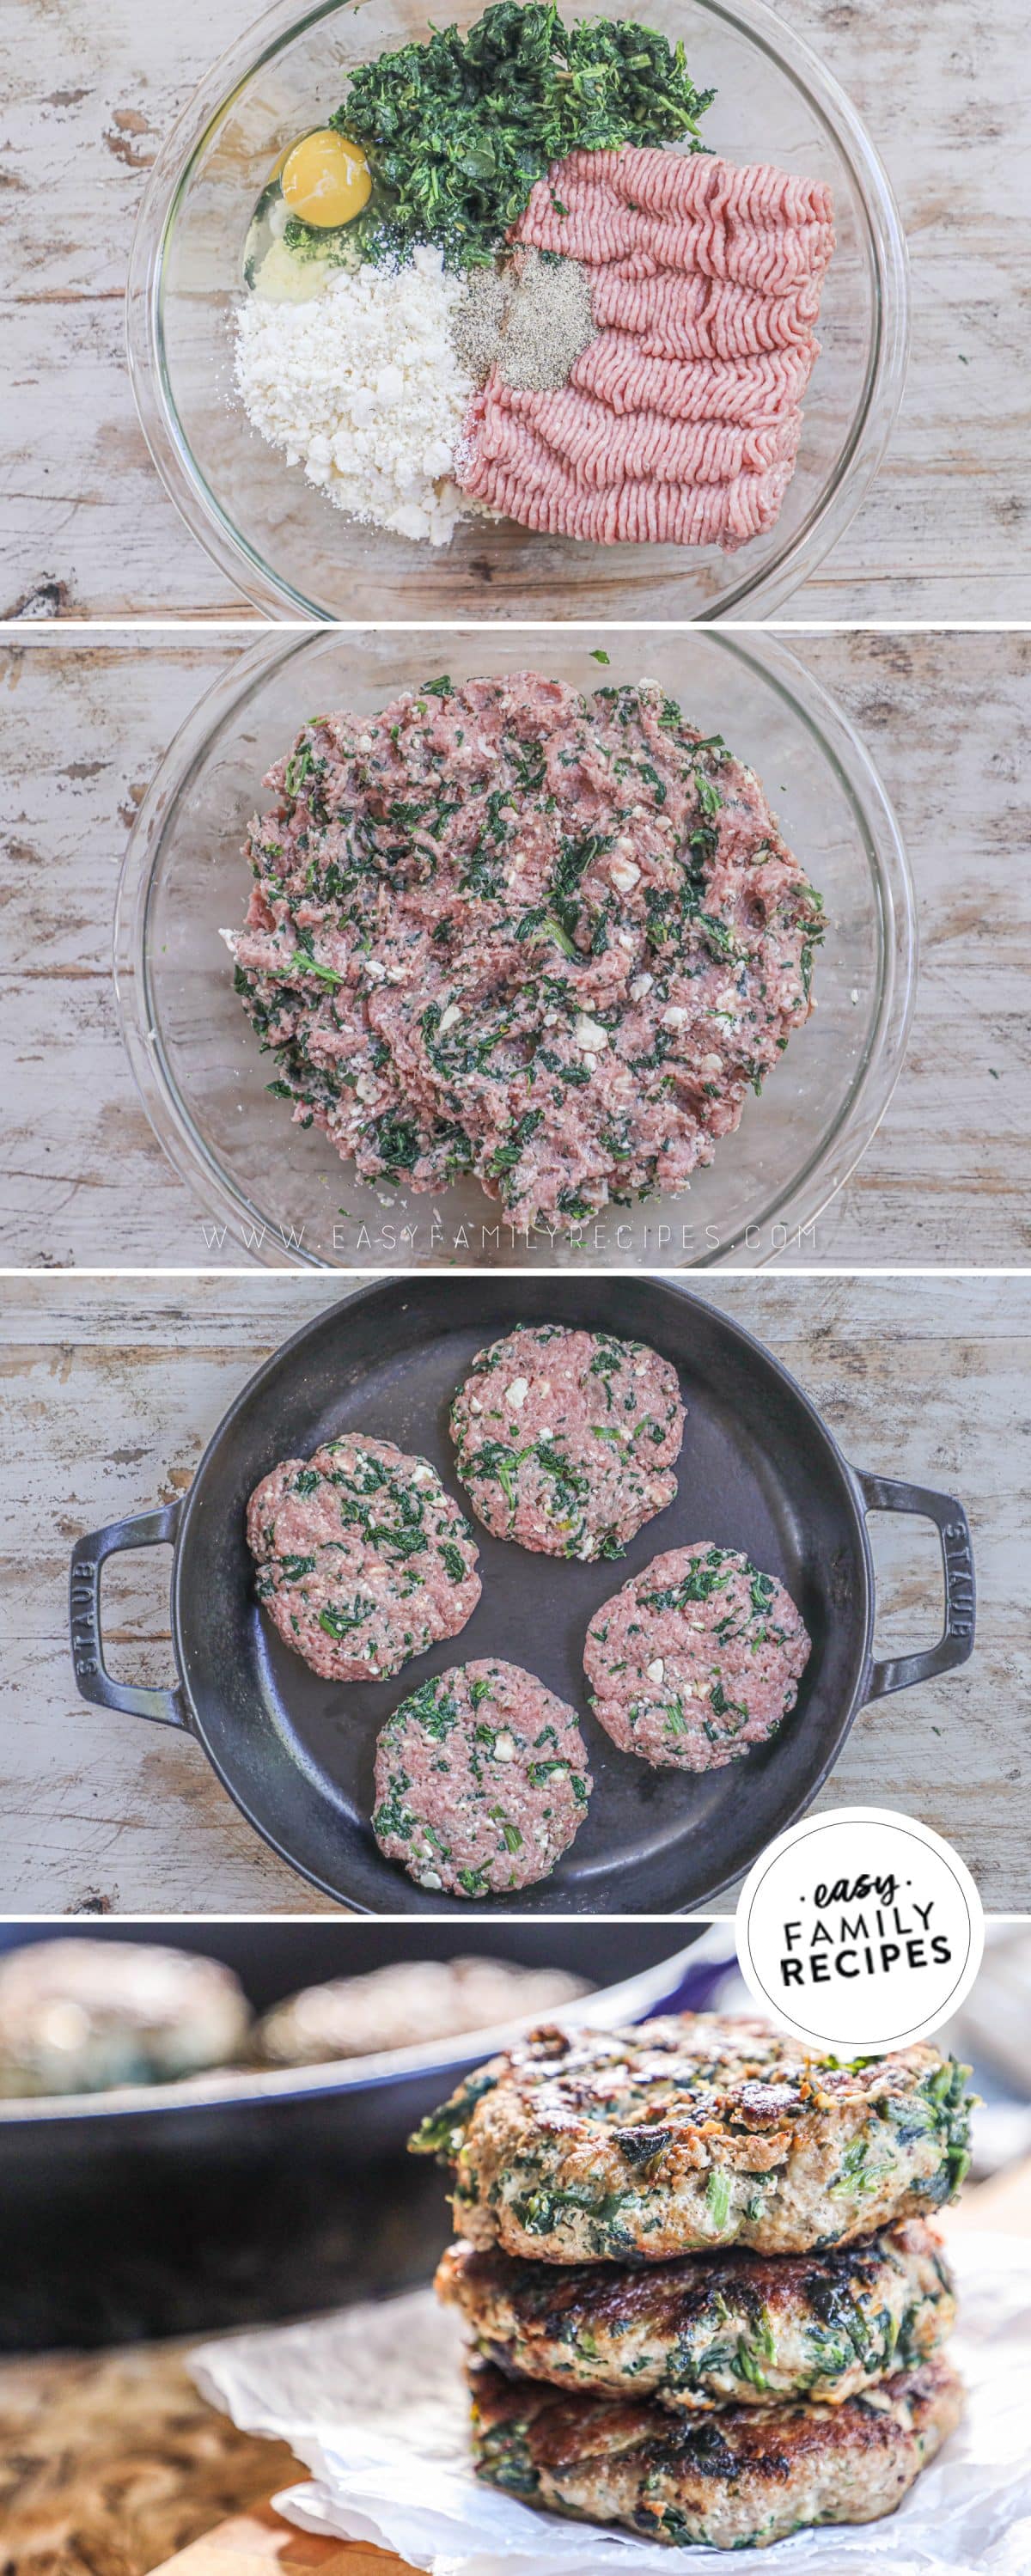 how to cook turkey burgers with feta and spinach 1)add ingredients to a bowl 2)mix well 3)form and cook 4)serve.